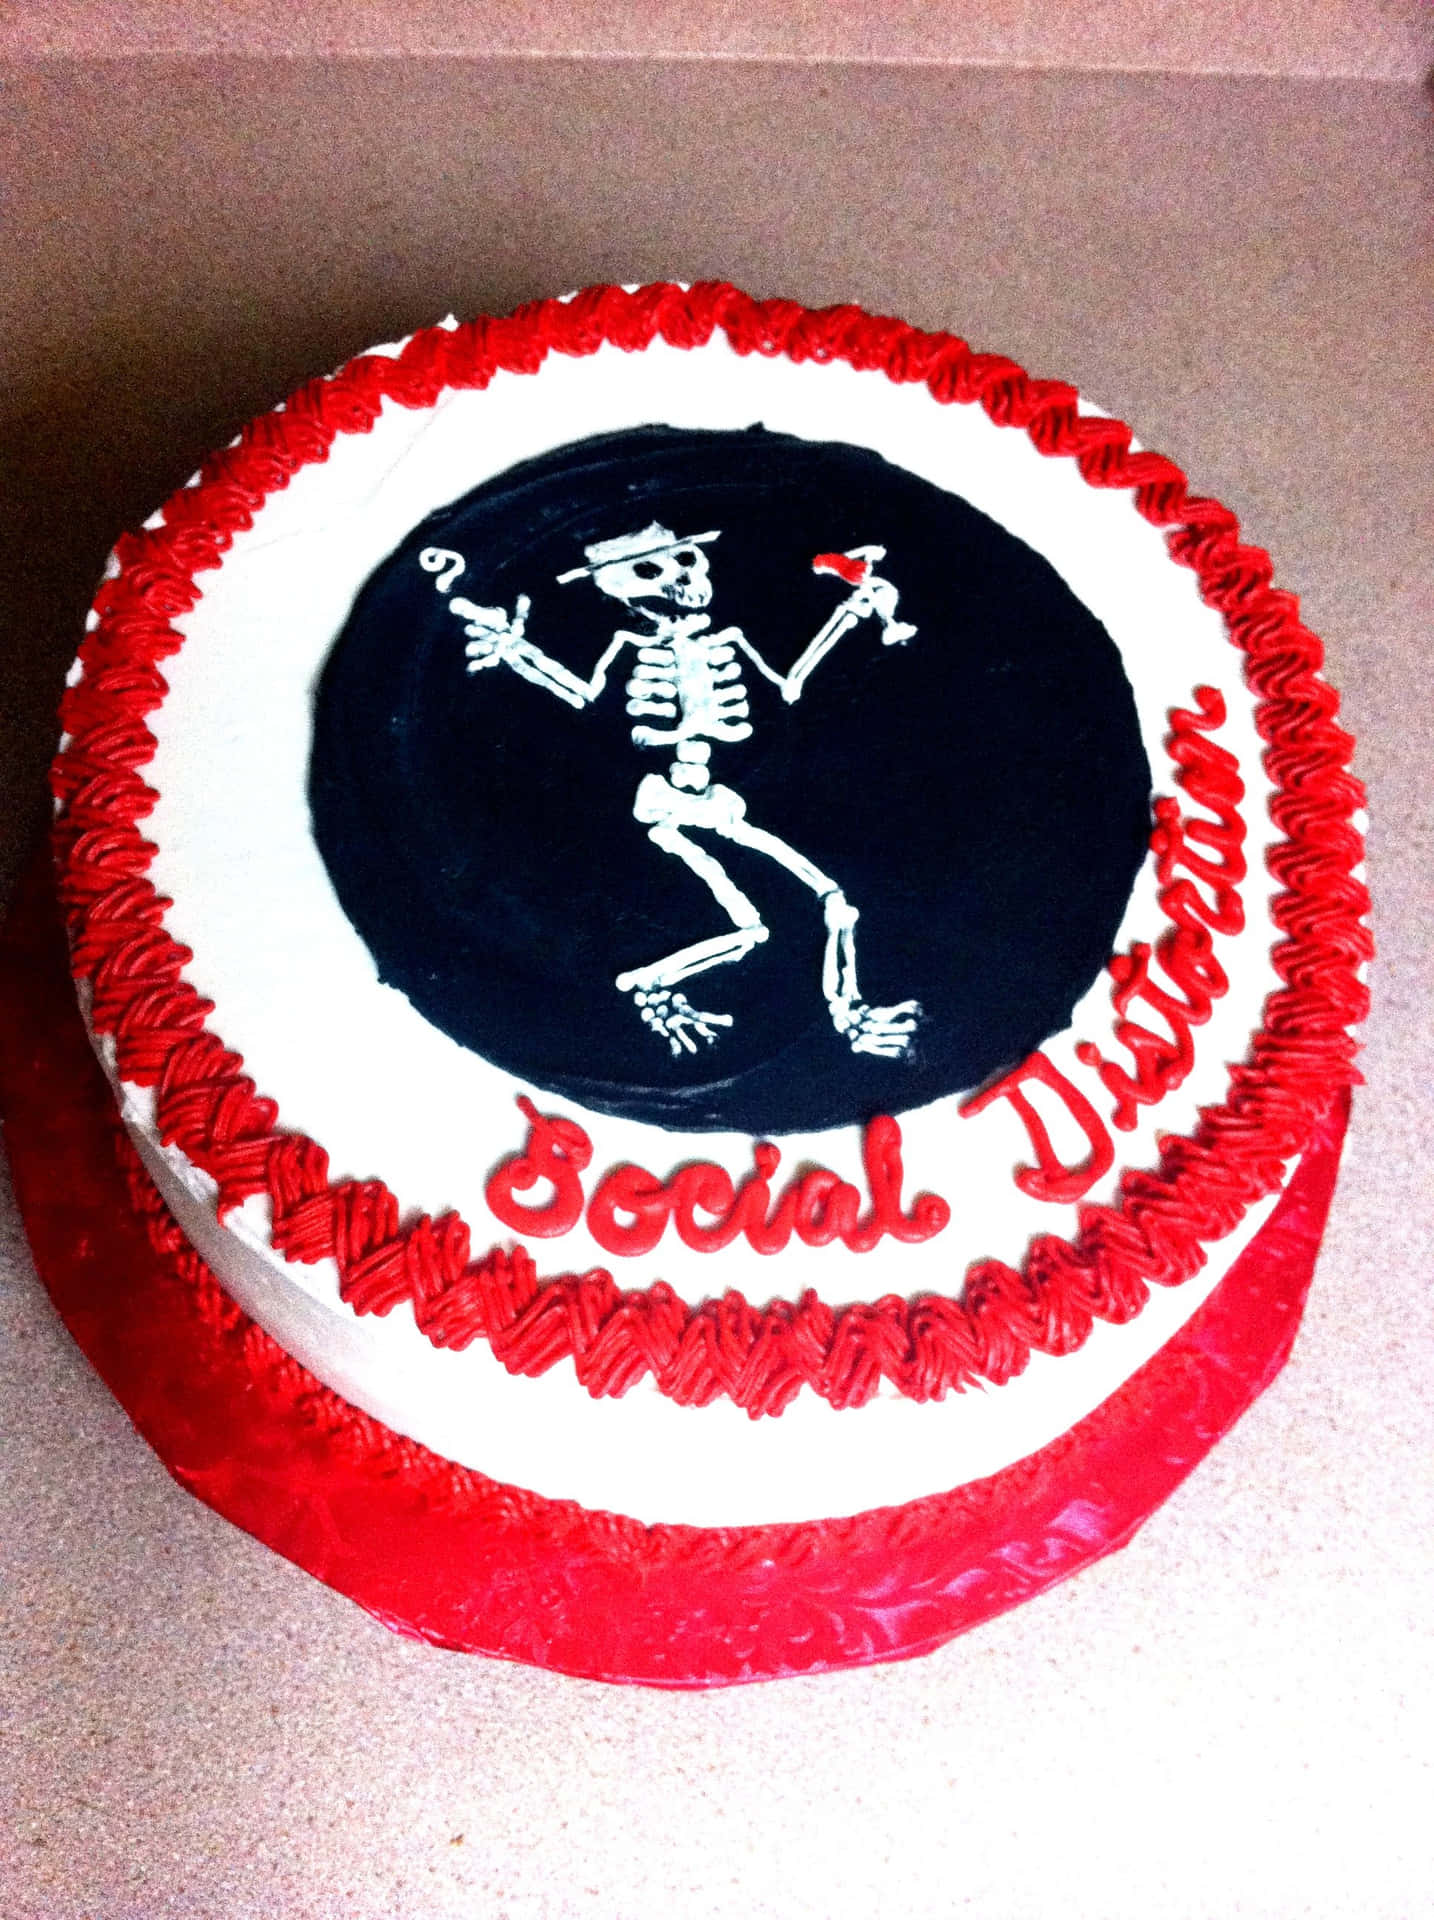 Social Distortion White With Red Cake Wallpaper